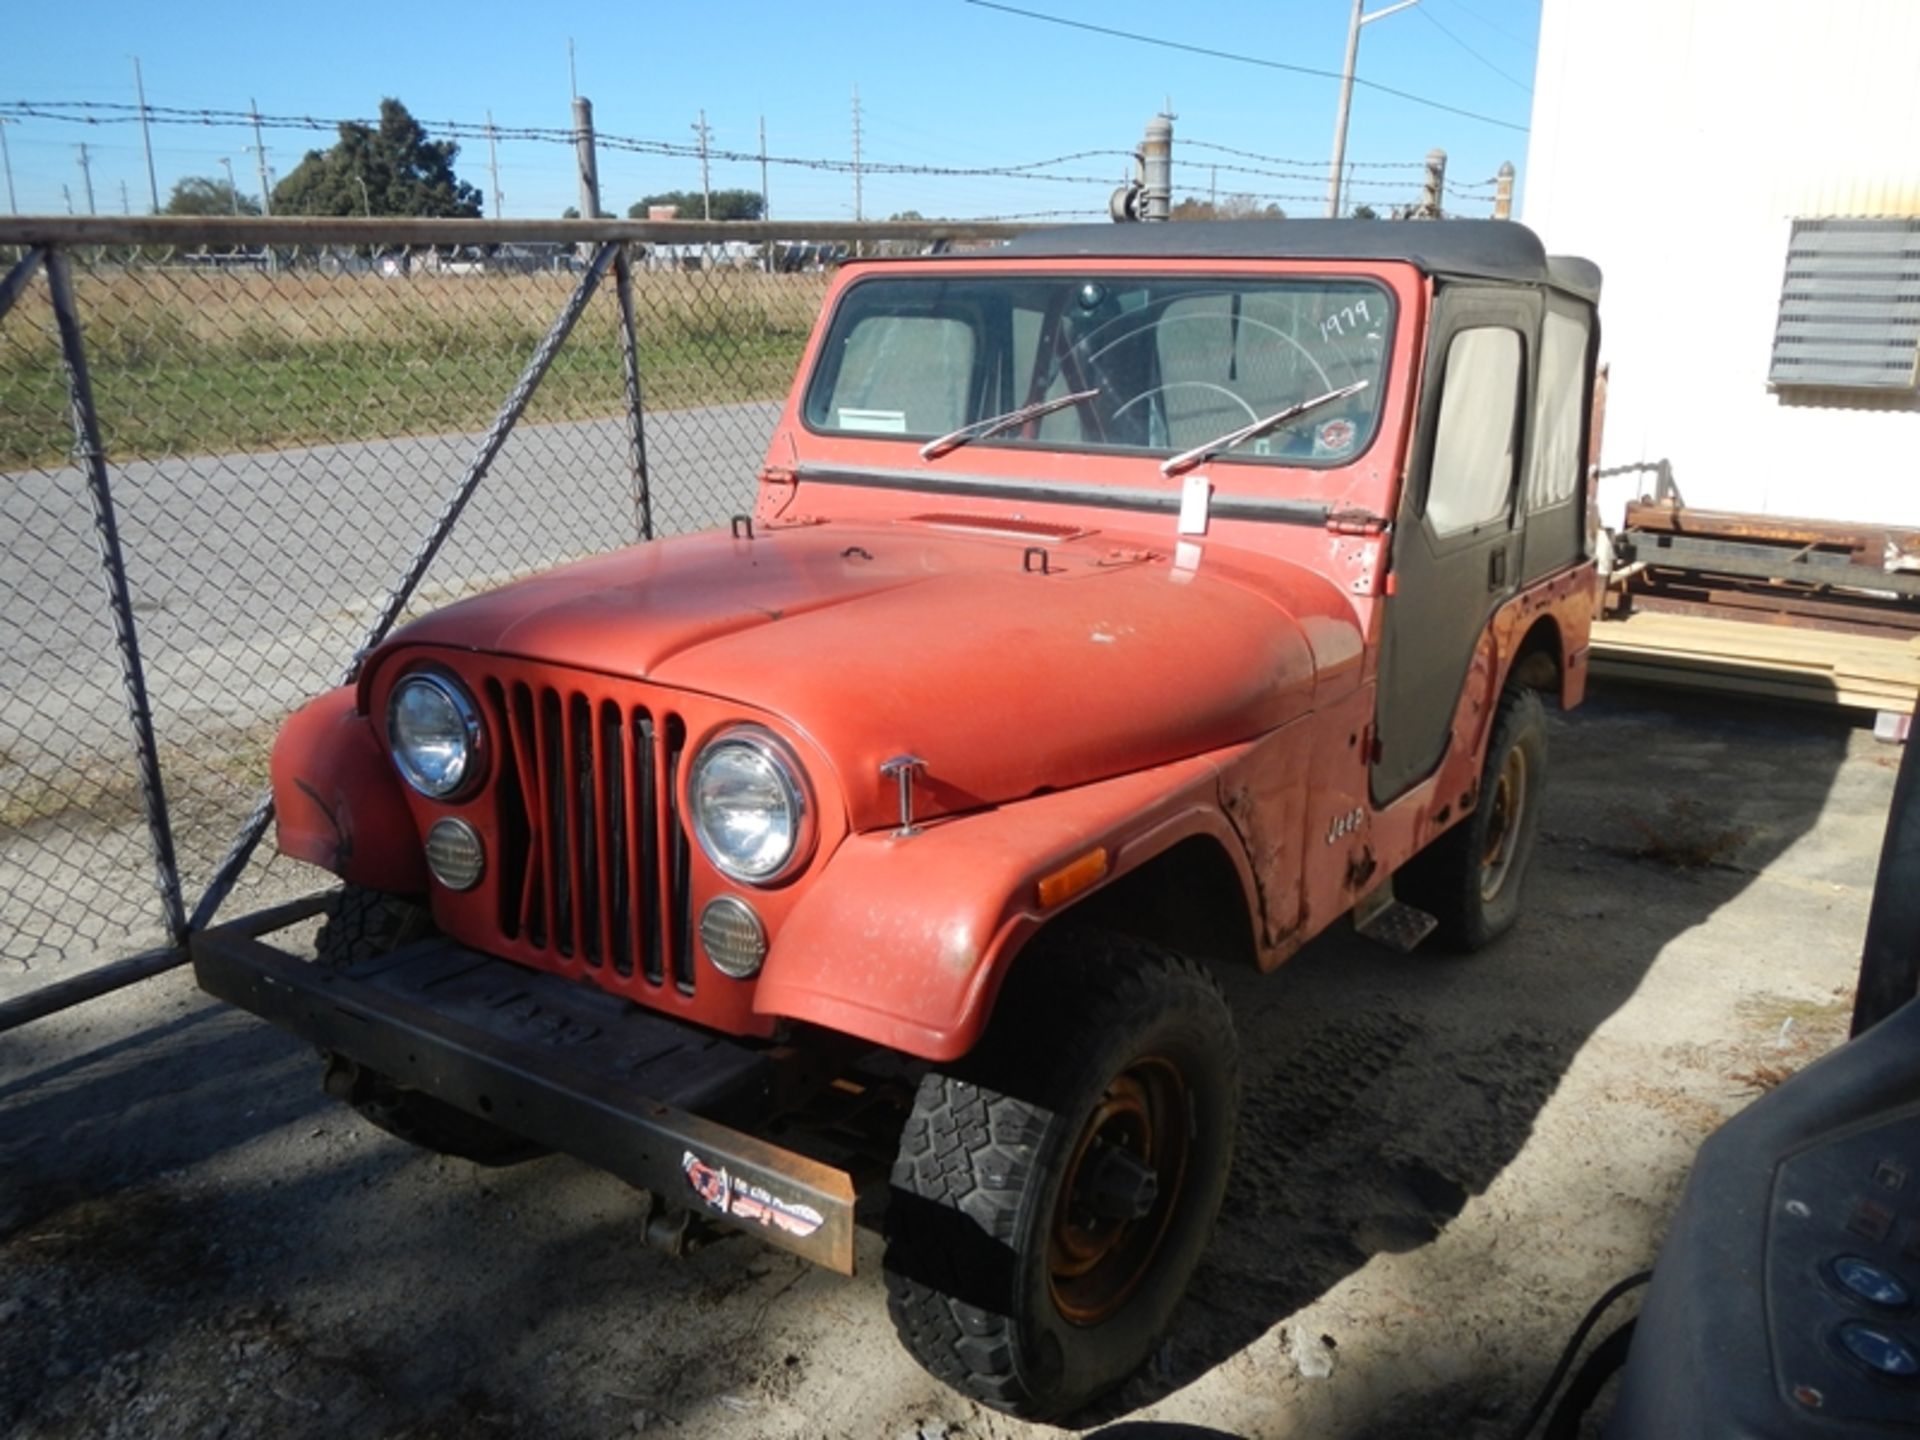 1979 JEEP CJ5 - complete running vehicle - lots of rust mileage unknown - J9F83AC811255Chasis is eat